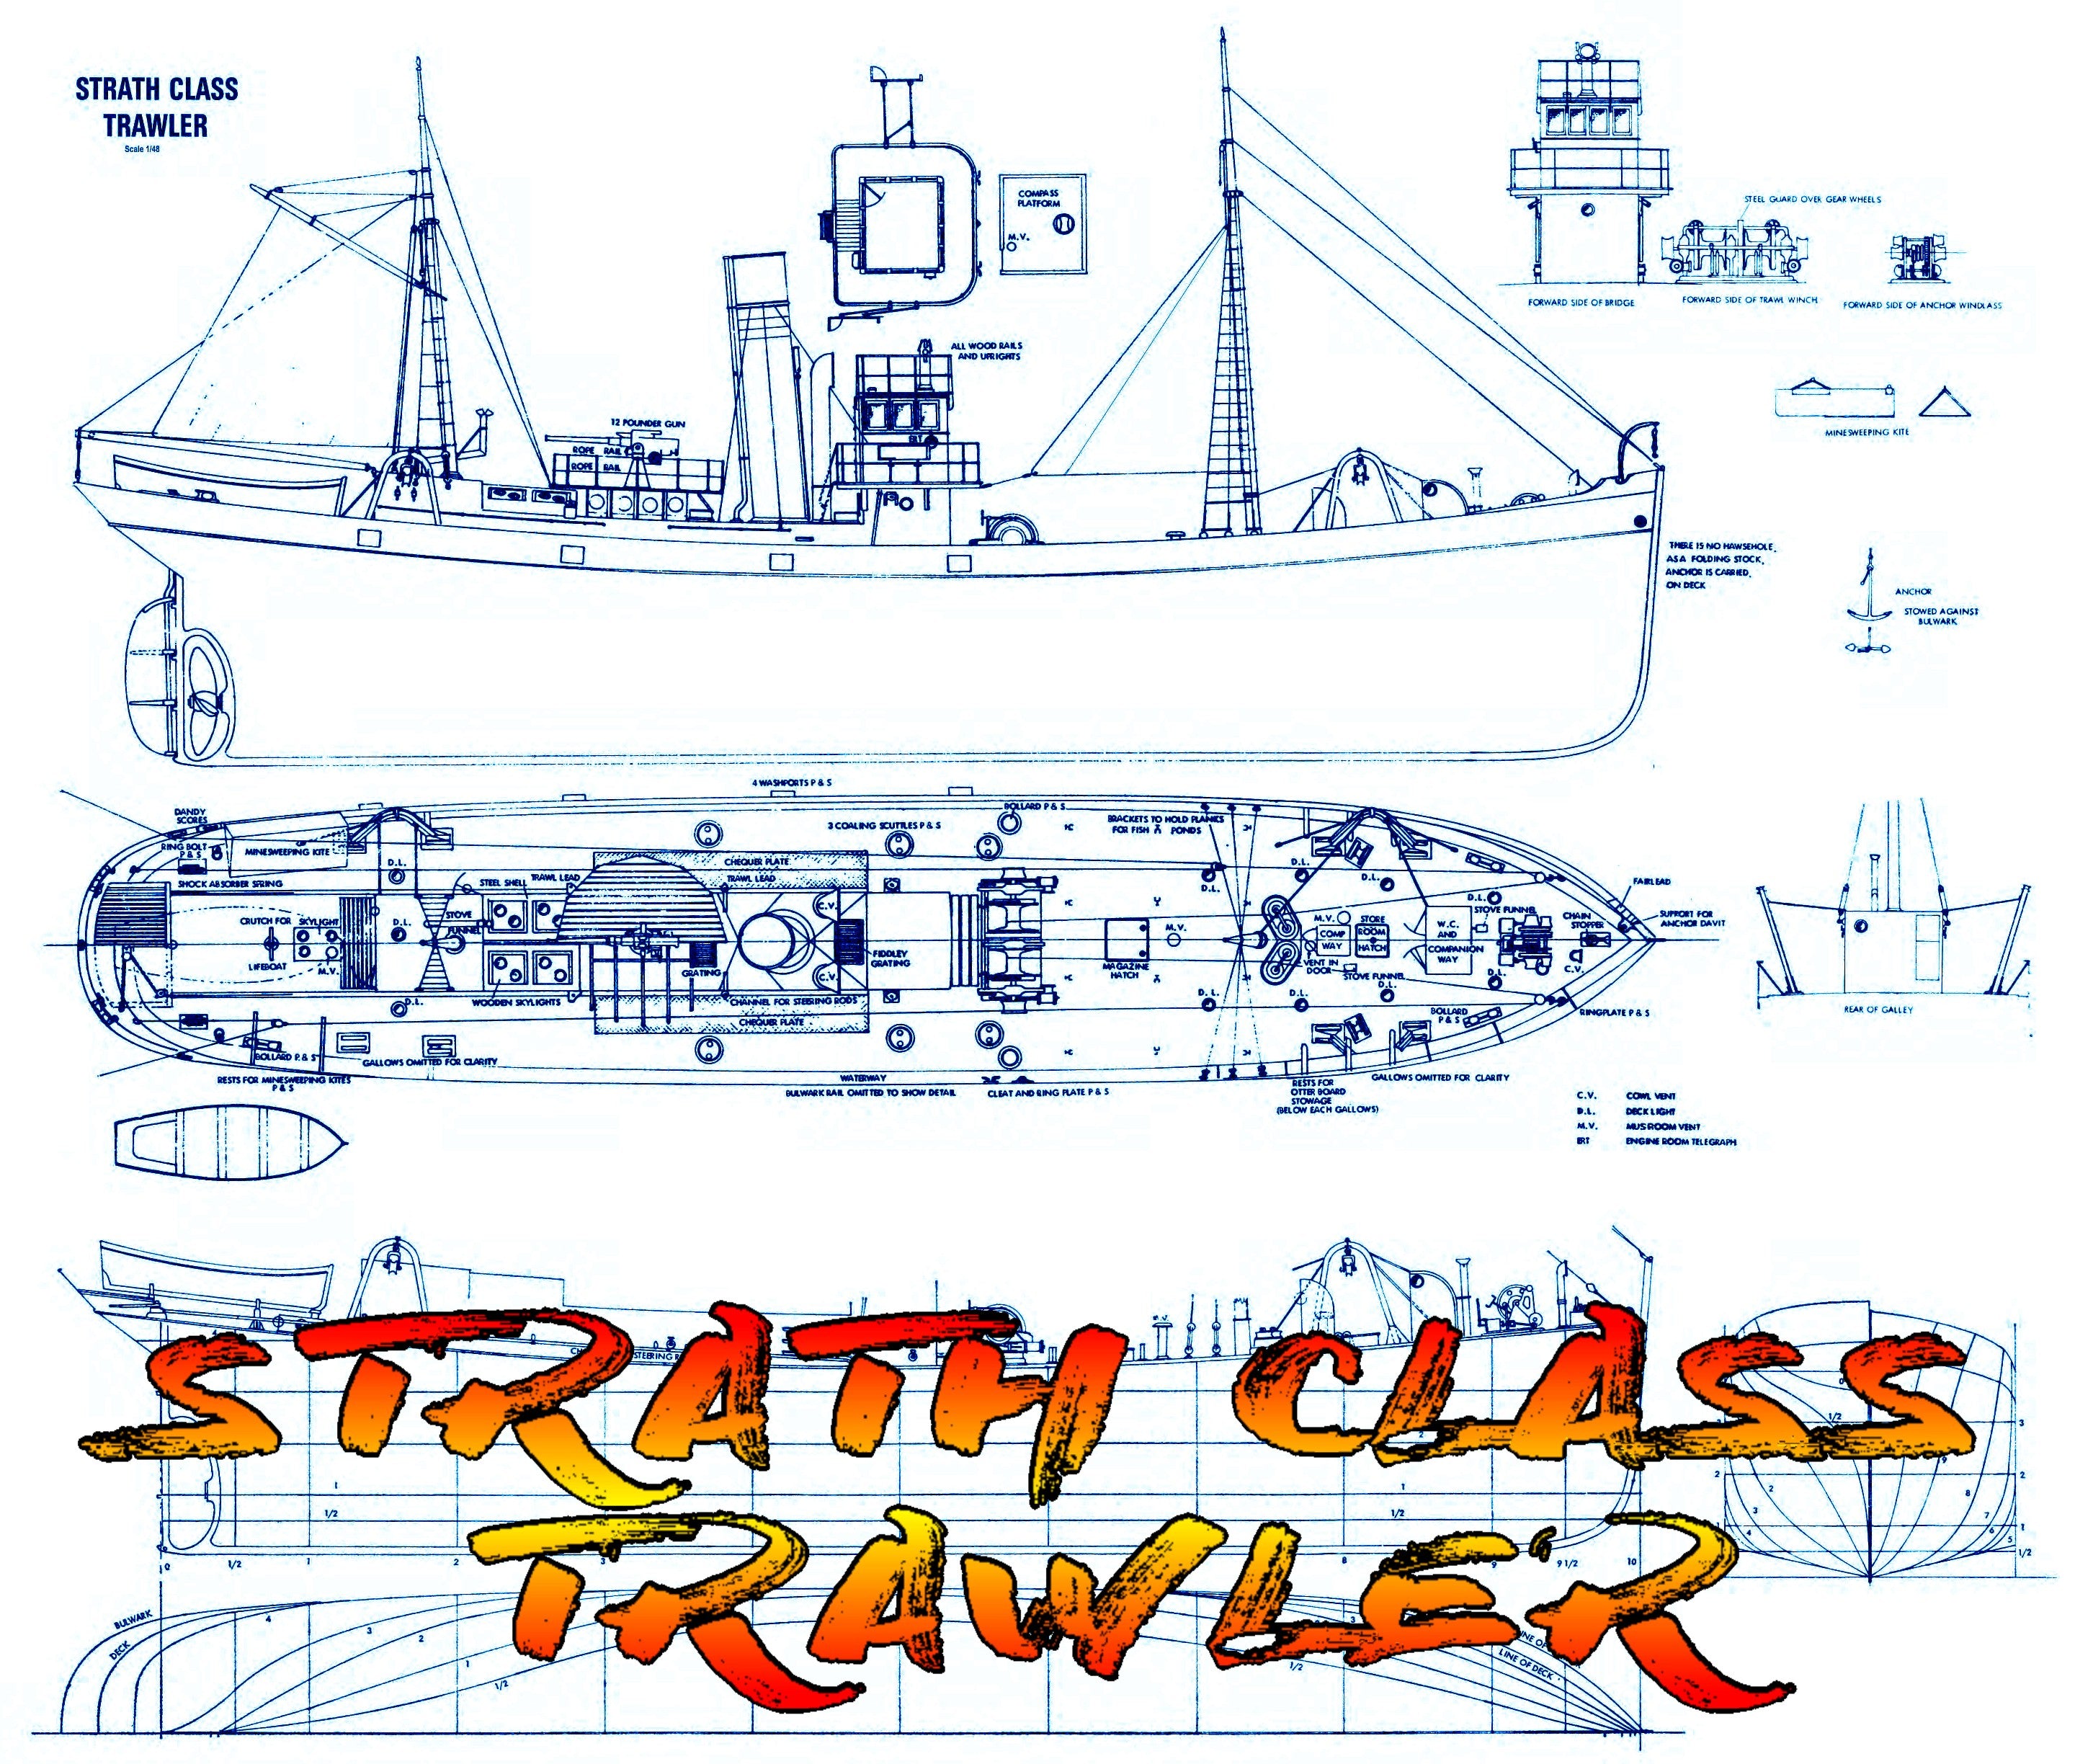 full size printed plan scale 1:48 suitable for radio control "strath class trawler"